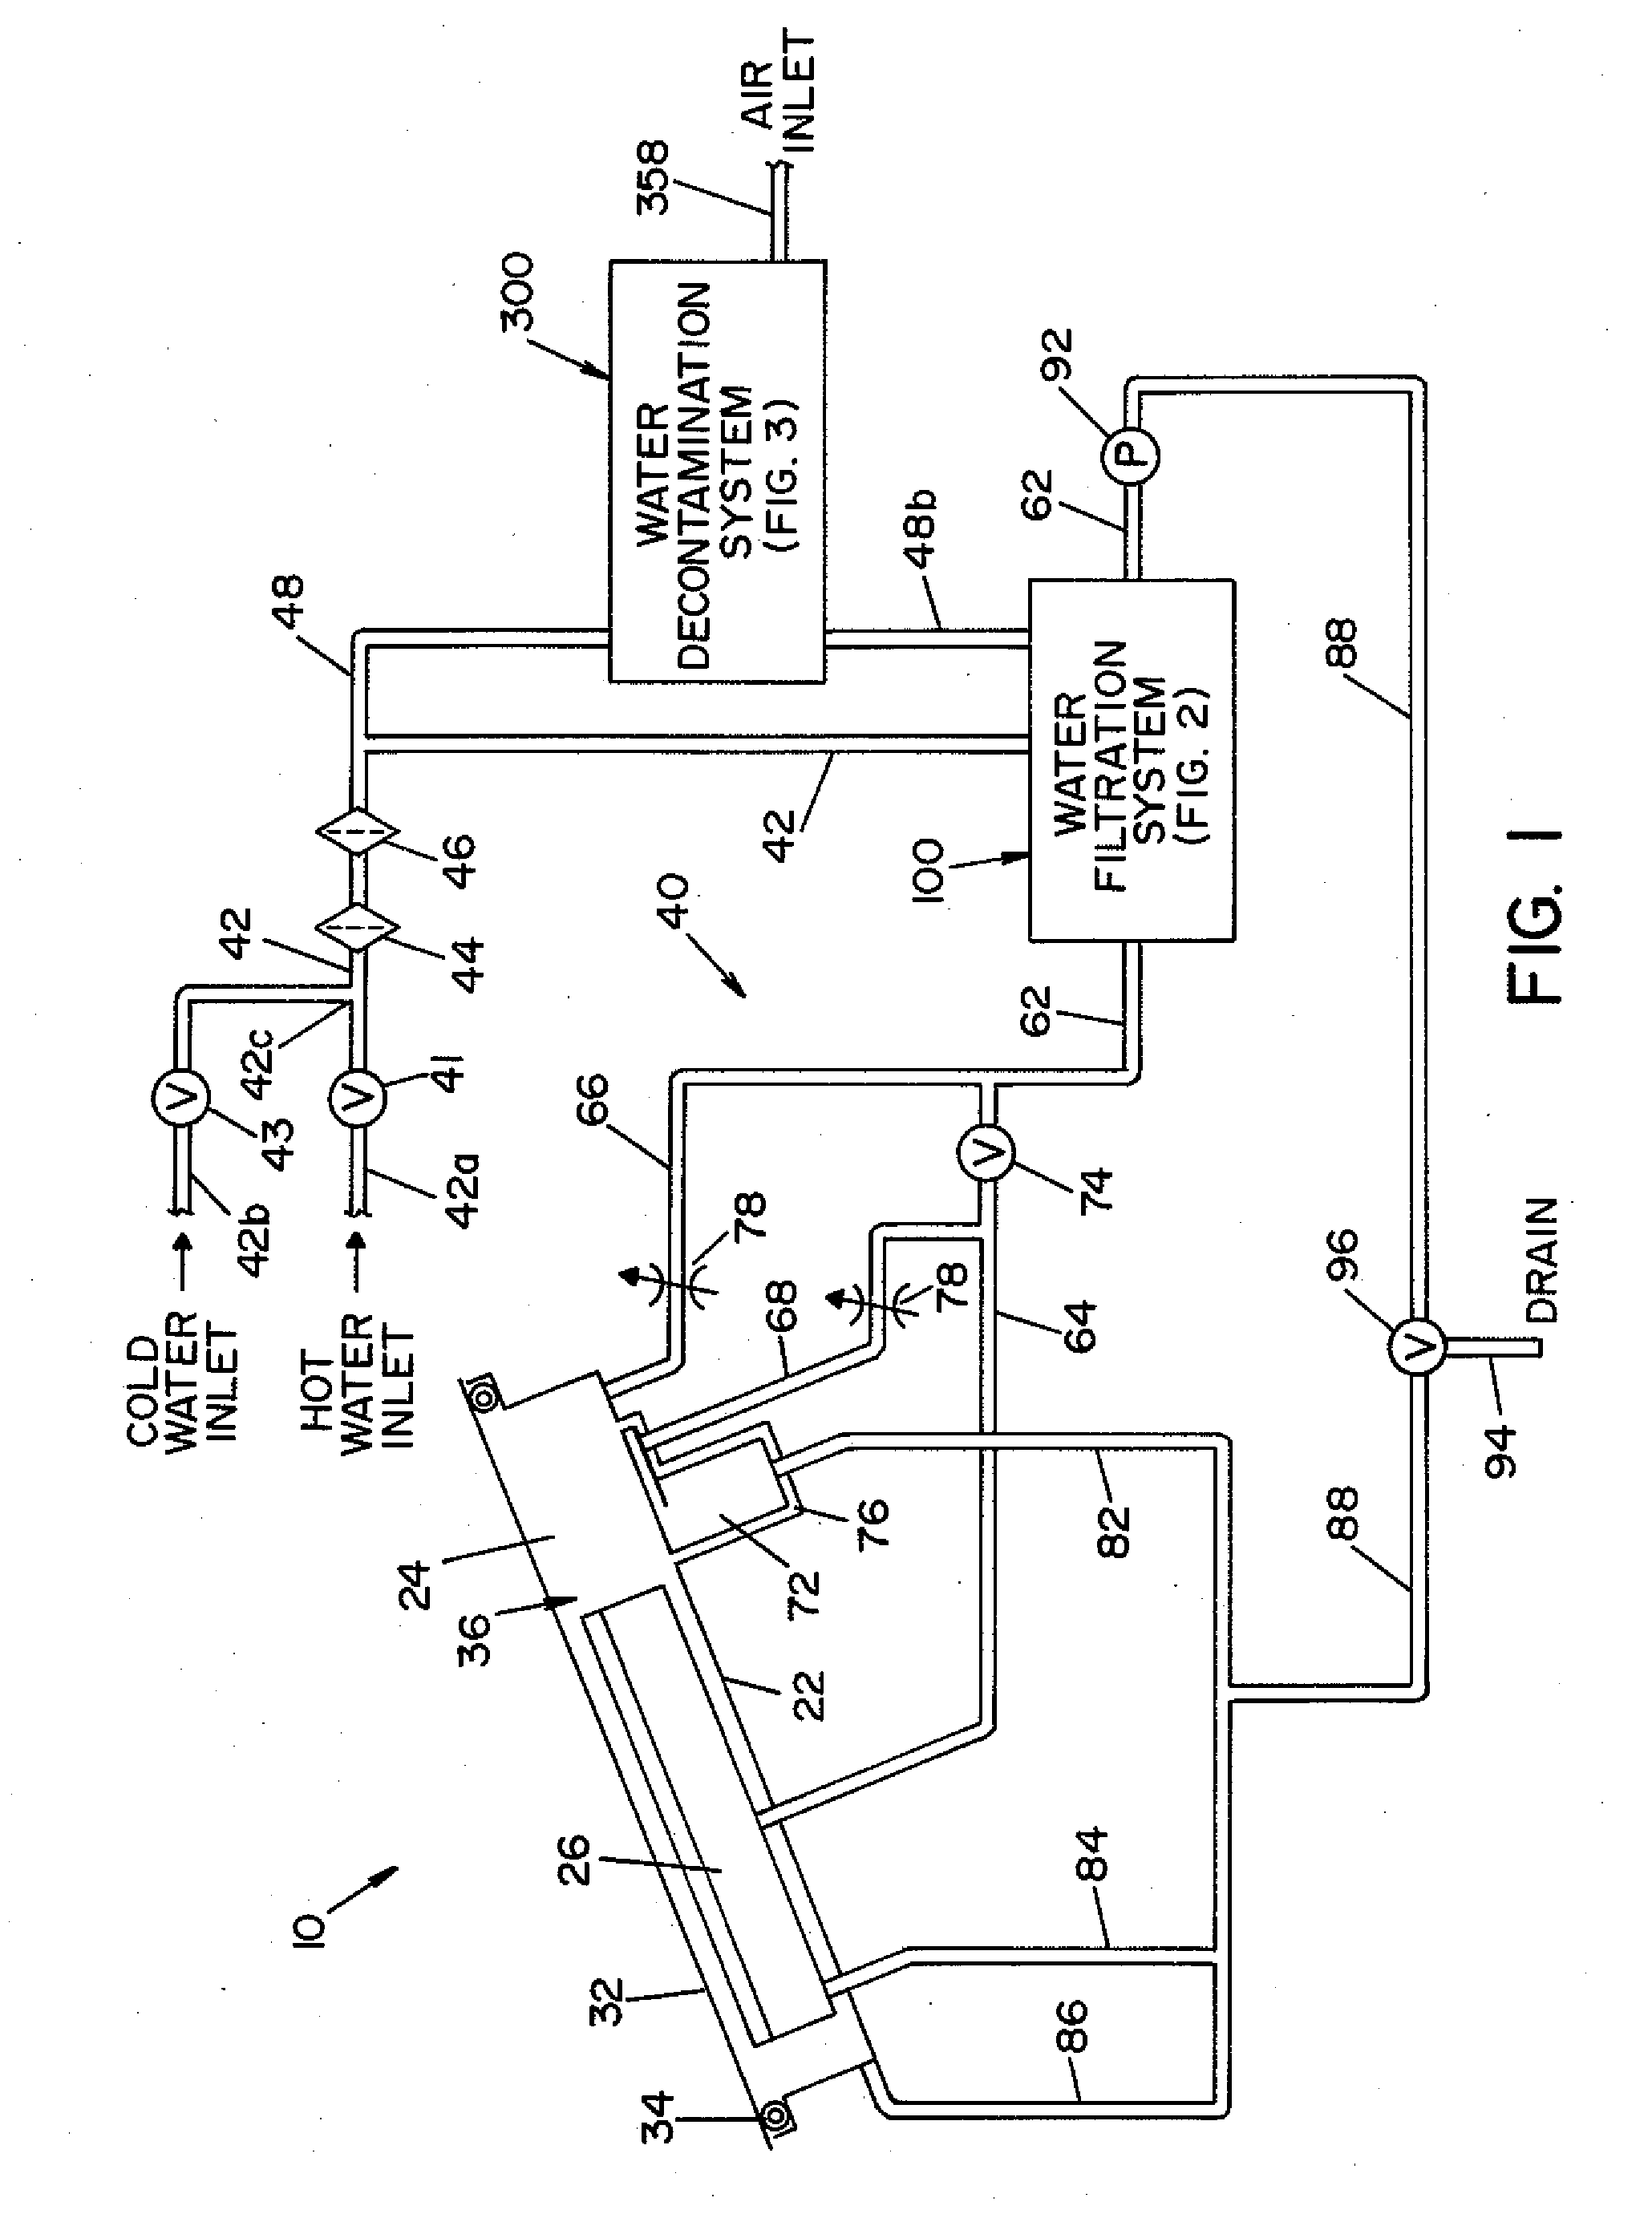 Method and apparatus for treating rinse water in decontamination devices